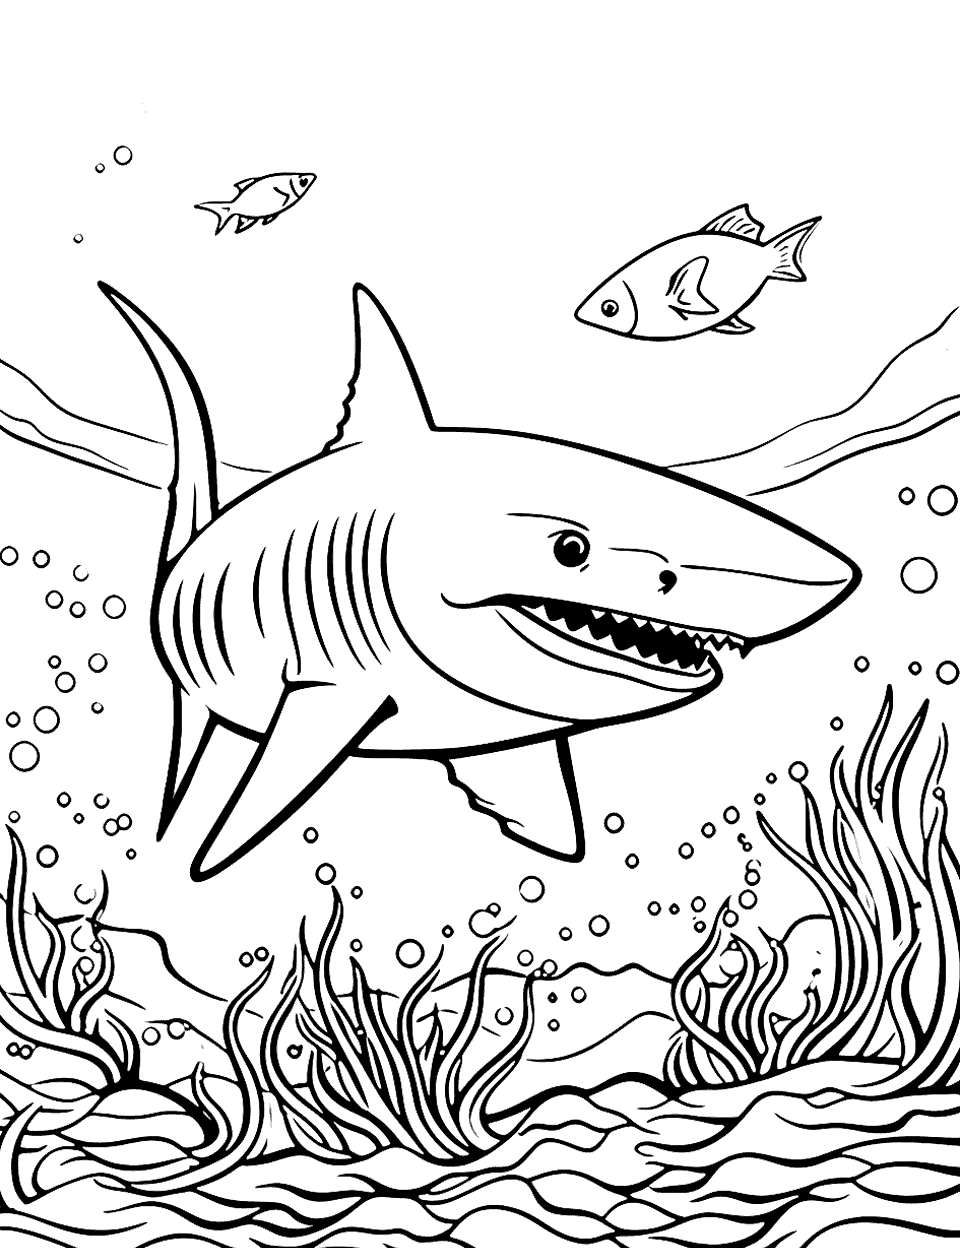 Reef Shark Exploration Coloring Page - A reef shark exploring the depths of the ocean floor.